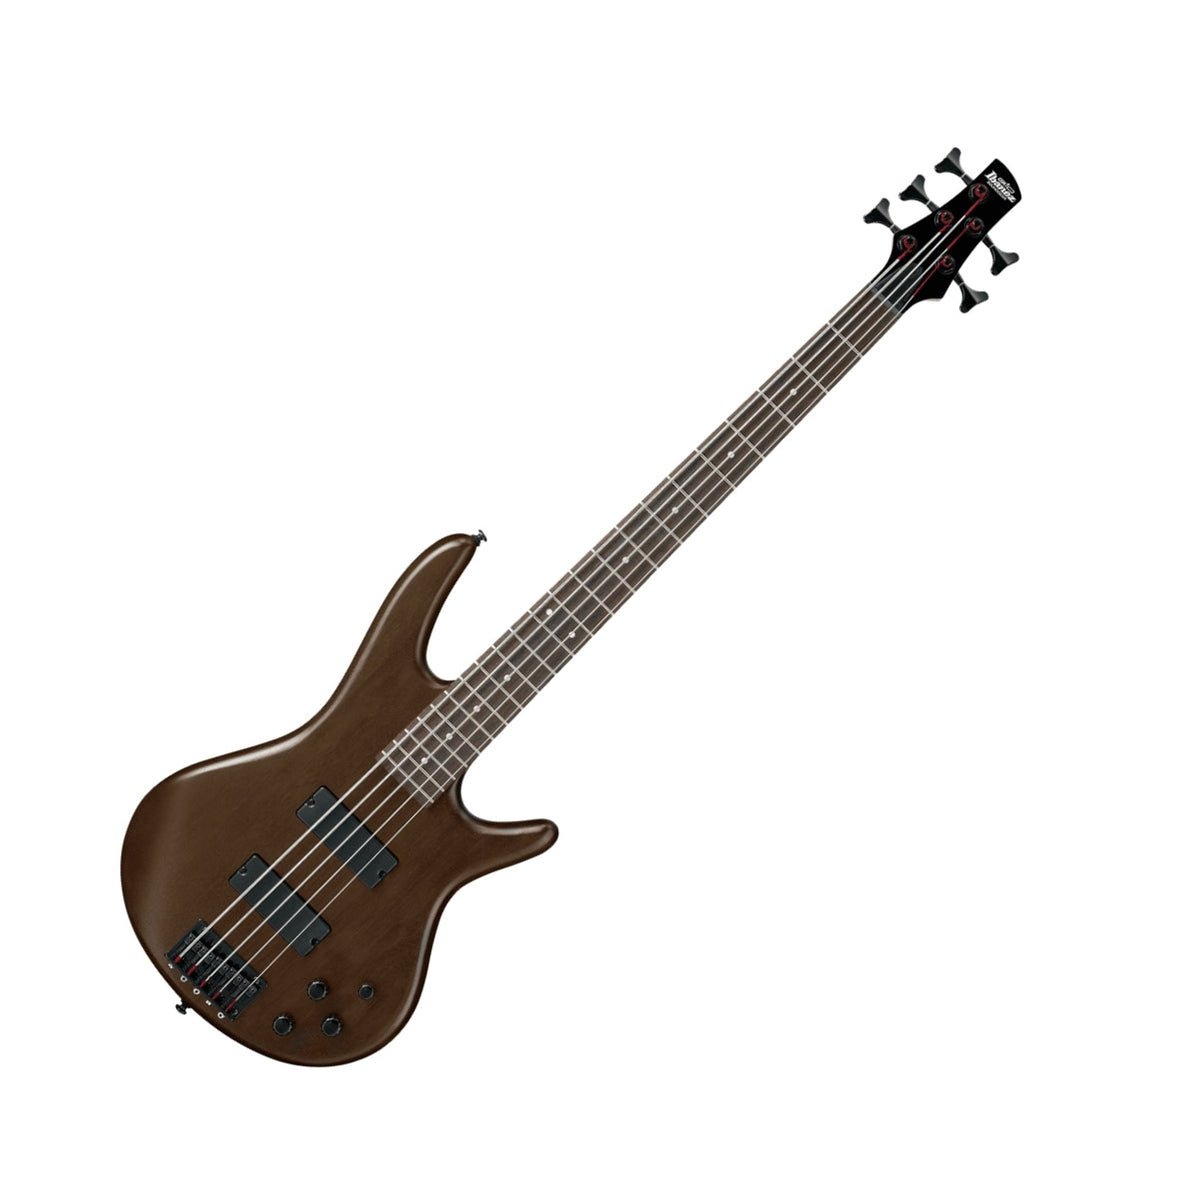 The Ibanez SR205B Electric 5 String Bass offers bass players a modern, affordable and exciting alternative.